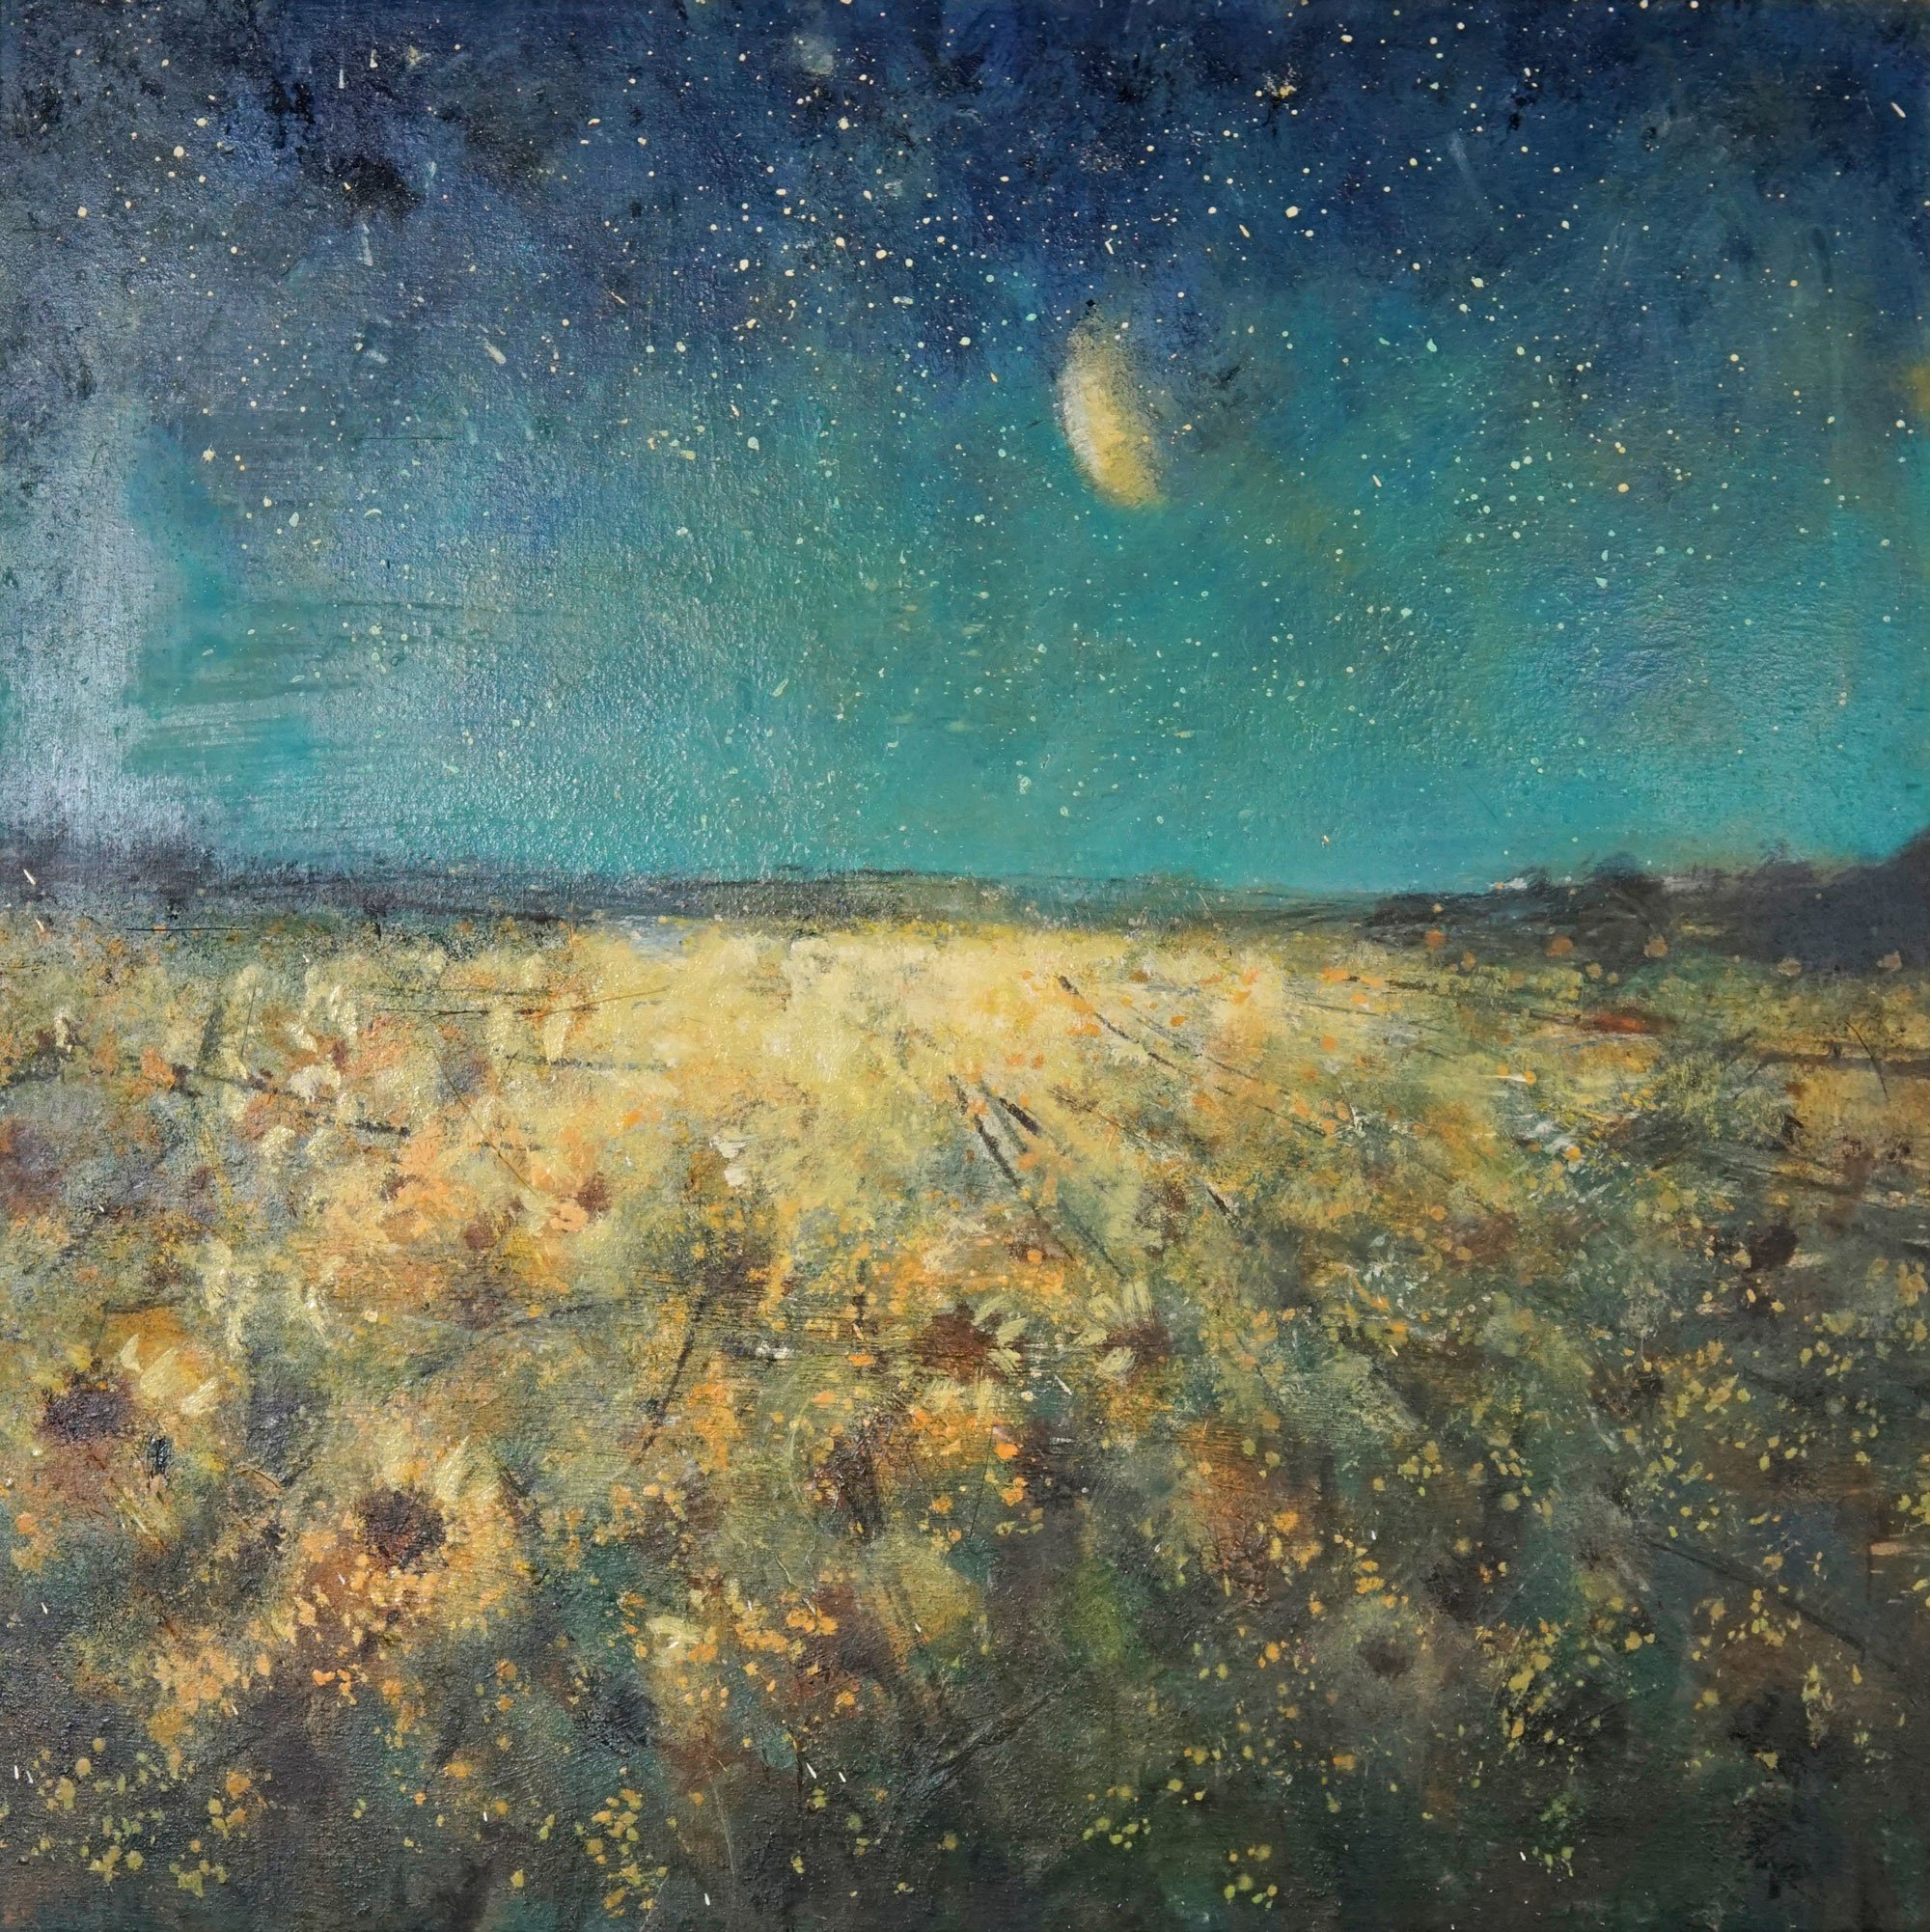 Field of Light with Moon (2021)